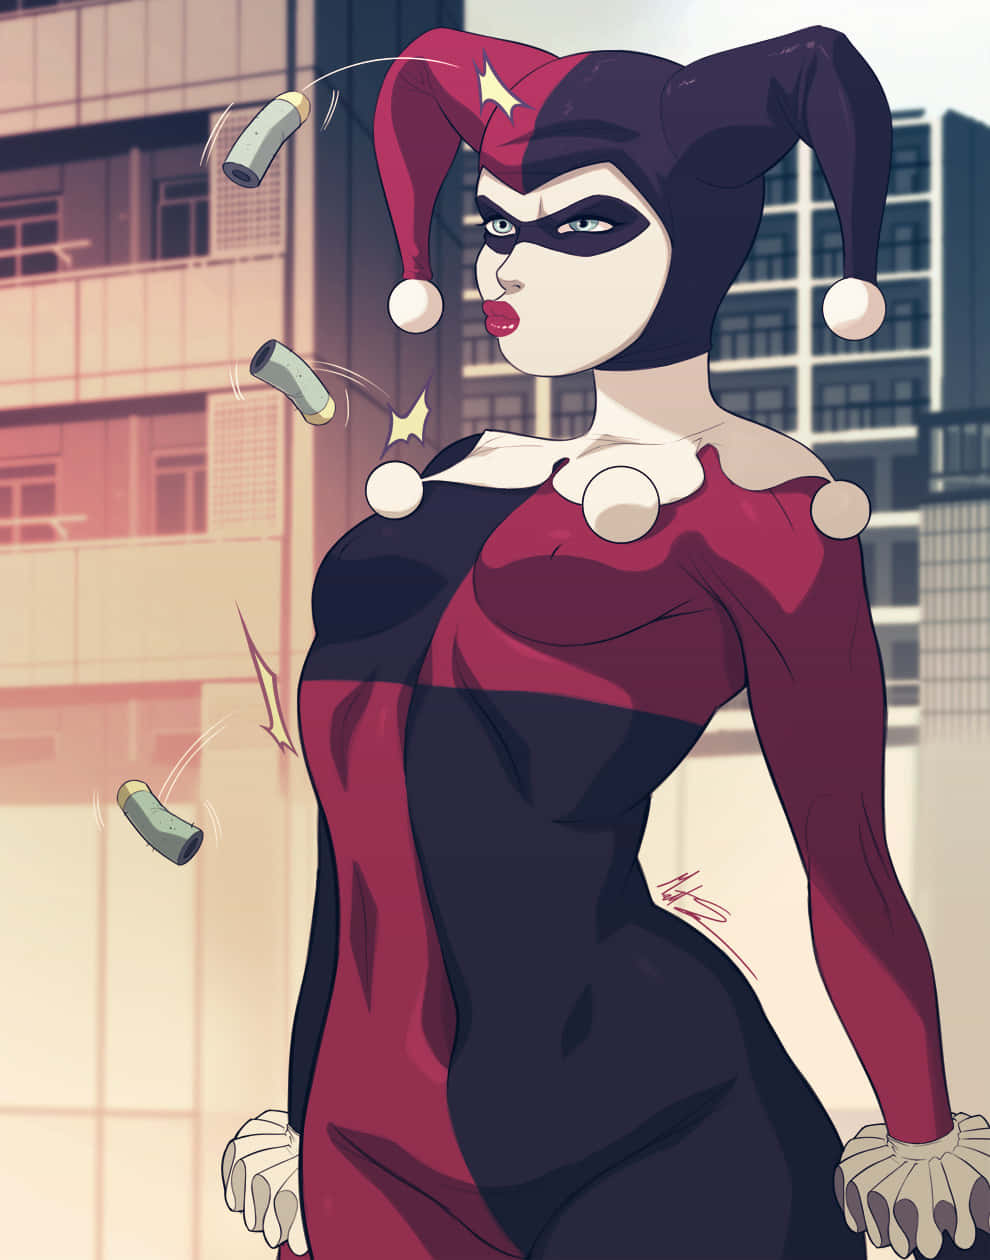 Classic Harley Quinn with her iconic mallet and playful pose Wallpaper